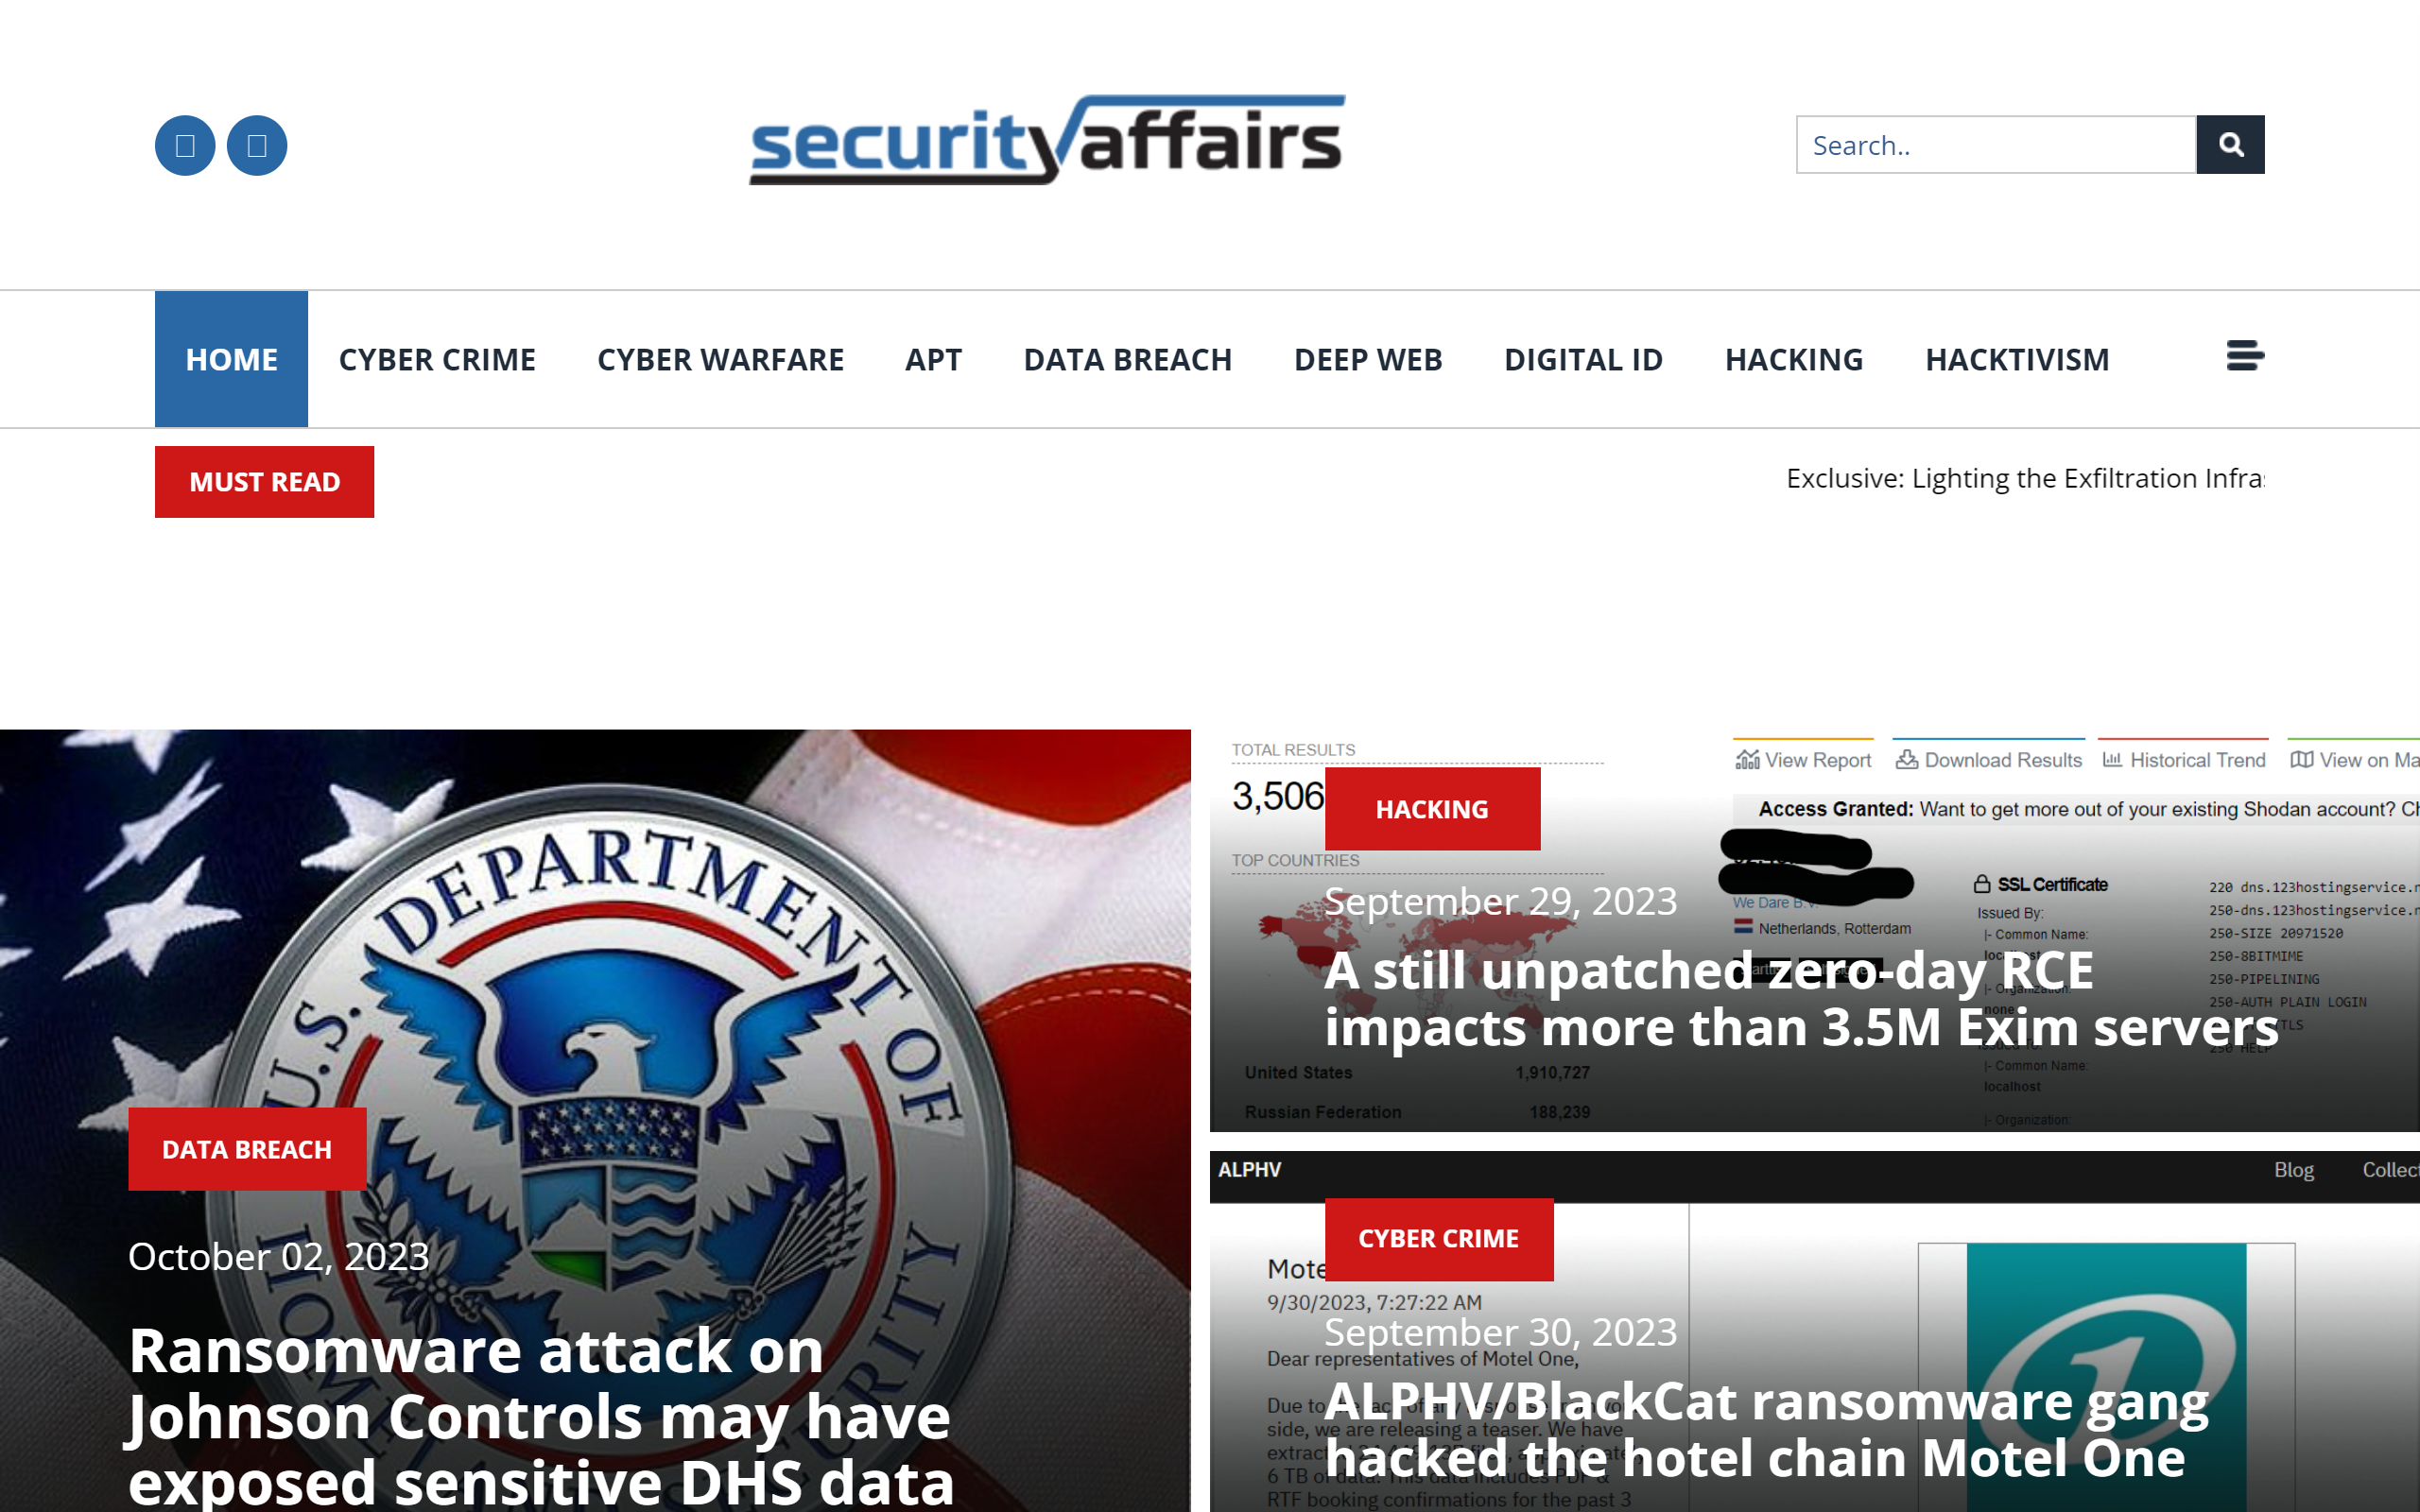 Security Affairs cybersecurity blog